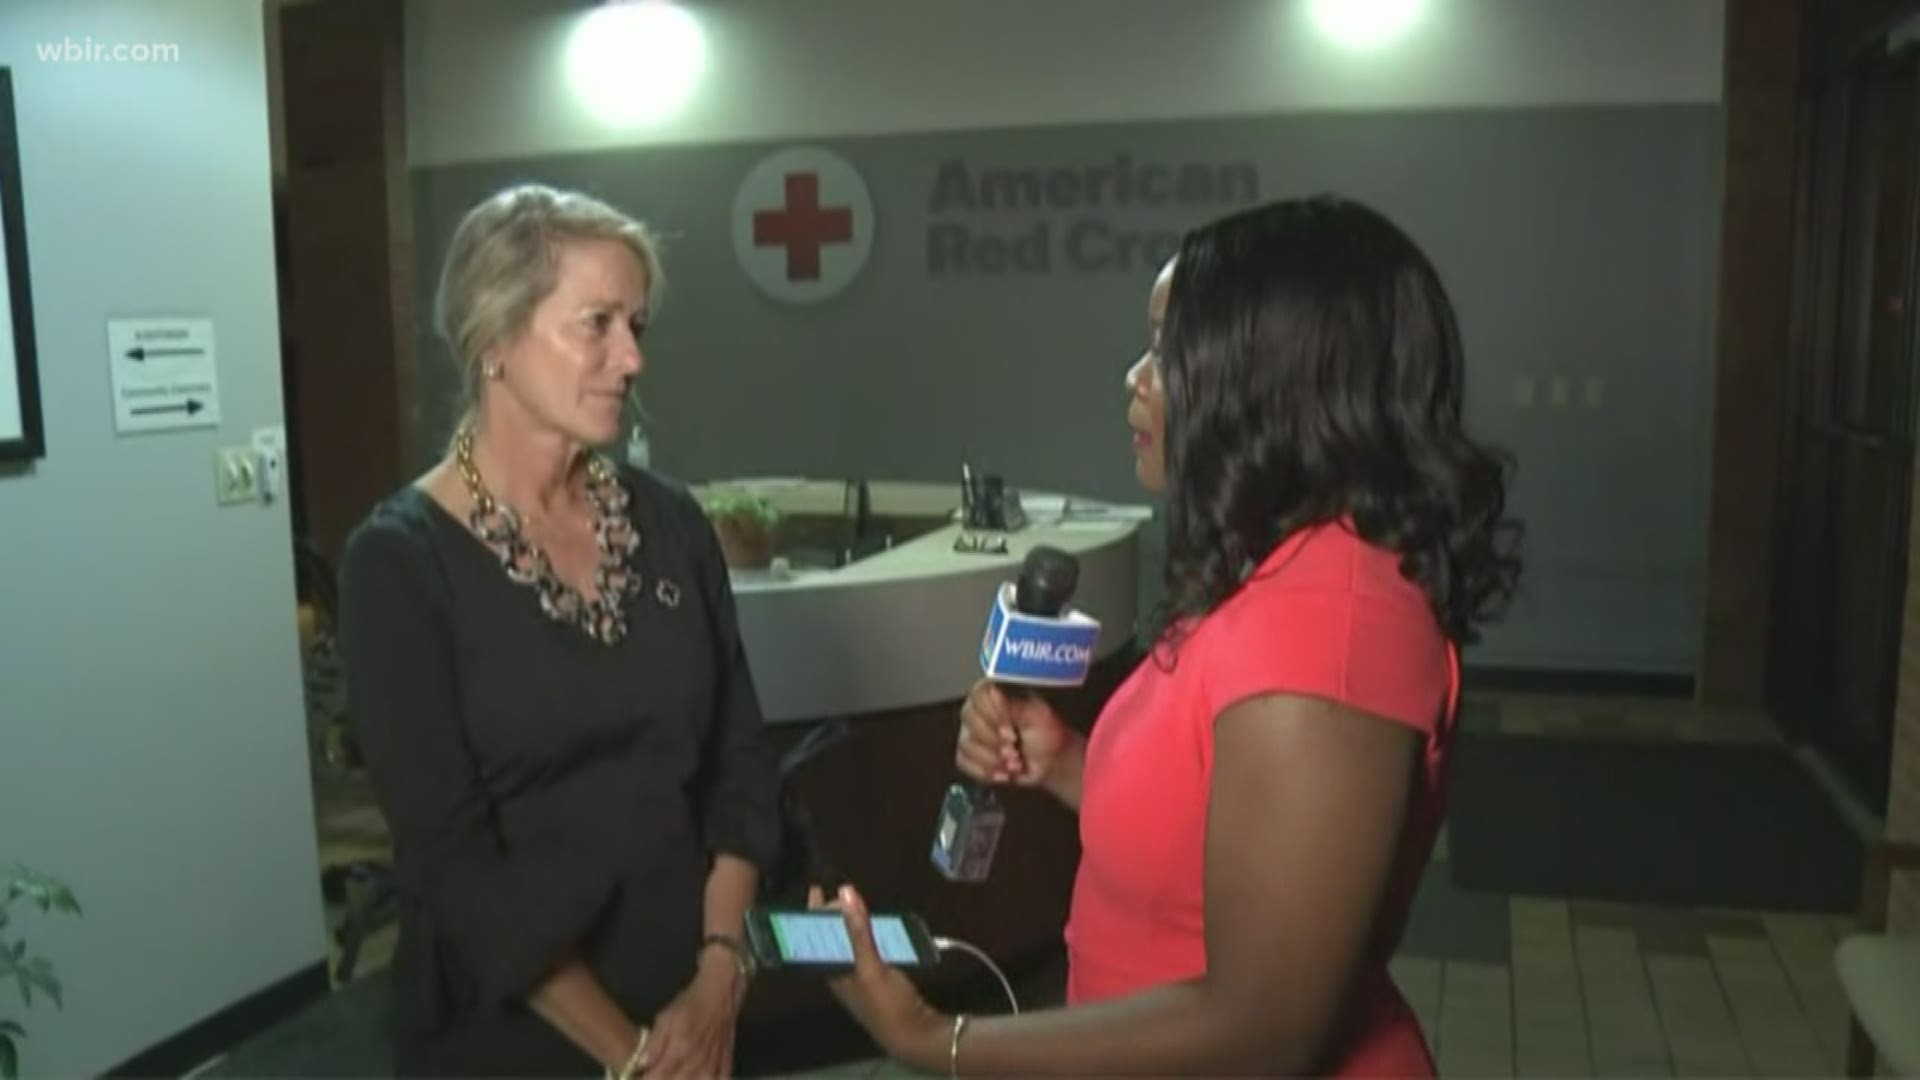 American Red Cross Volunteers are stepping up to help communities in the path of Hurricane Dorian. 10News Reporter Yvonne Thomas describes how you can help.